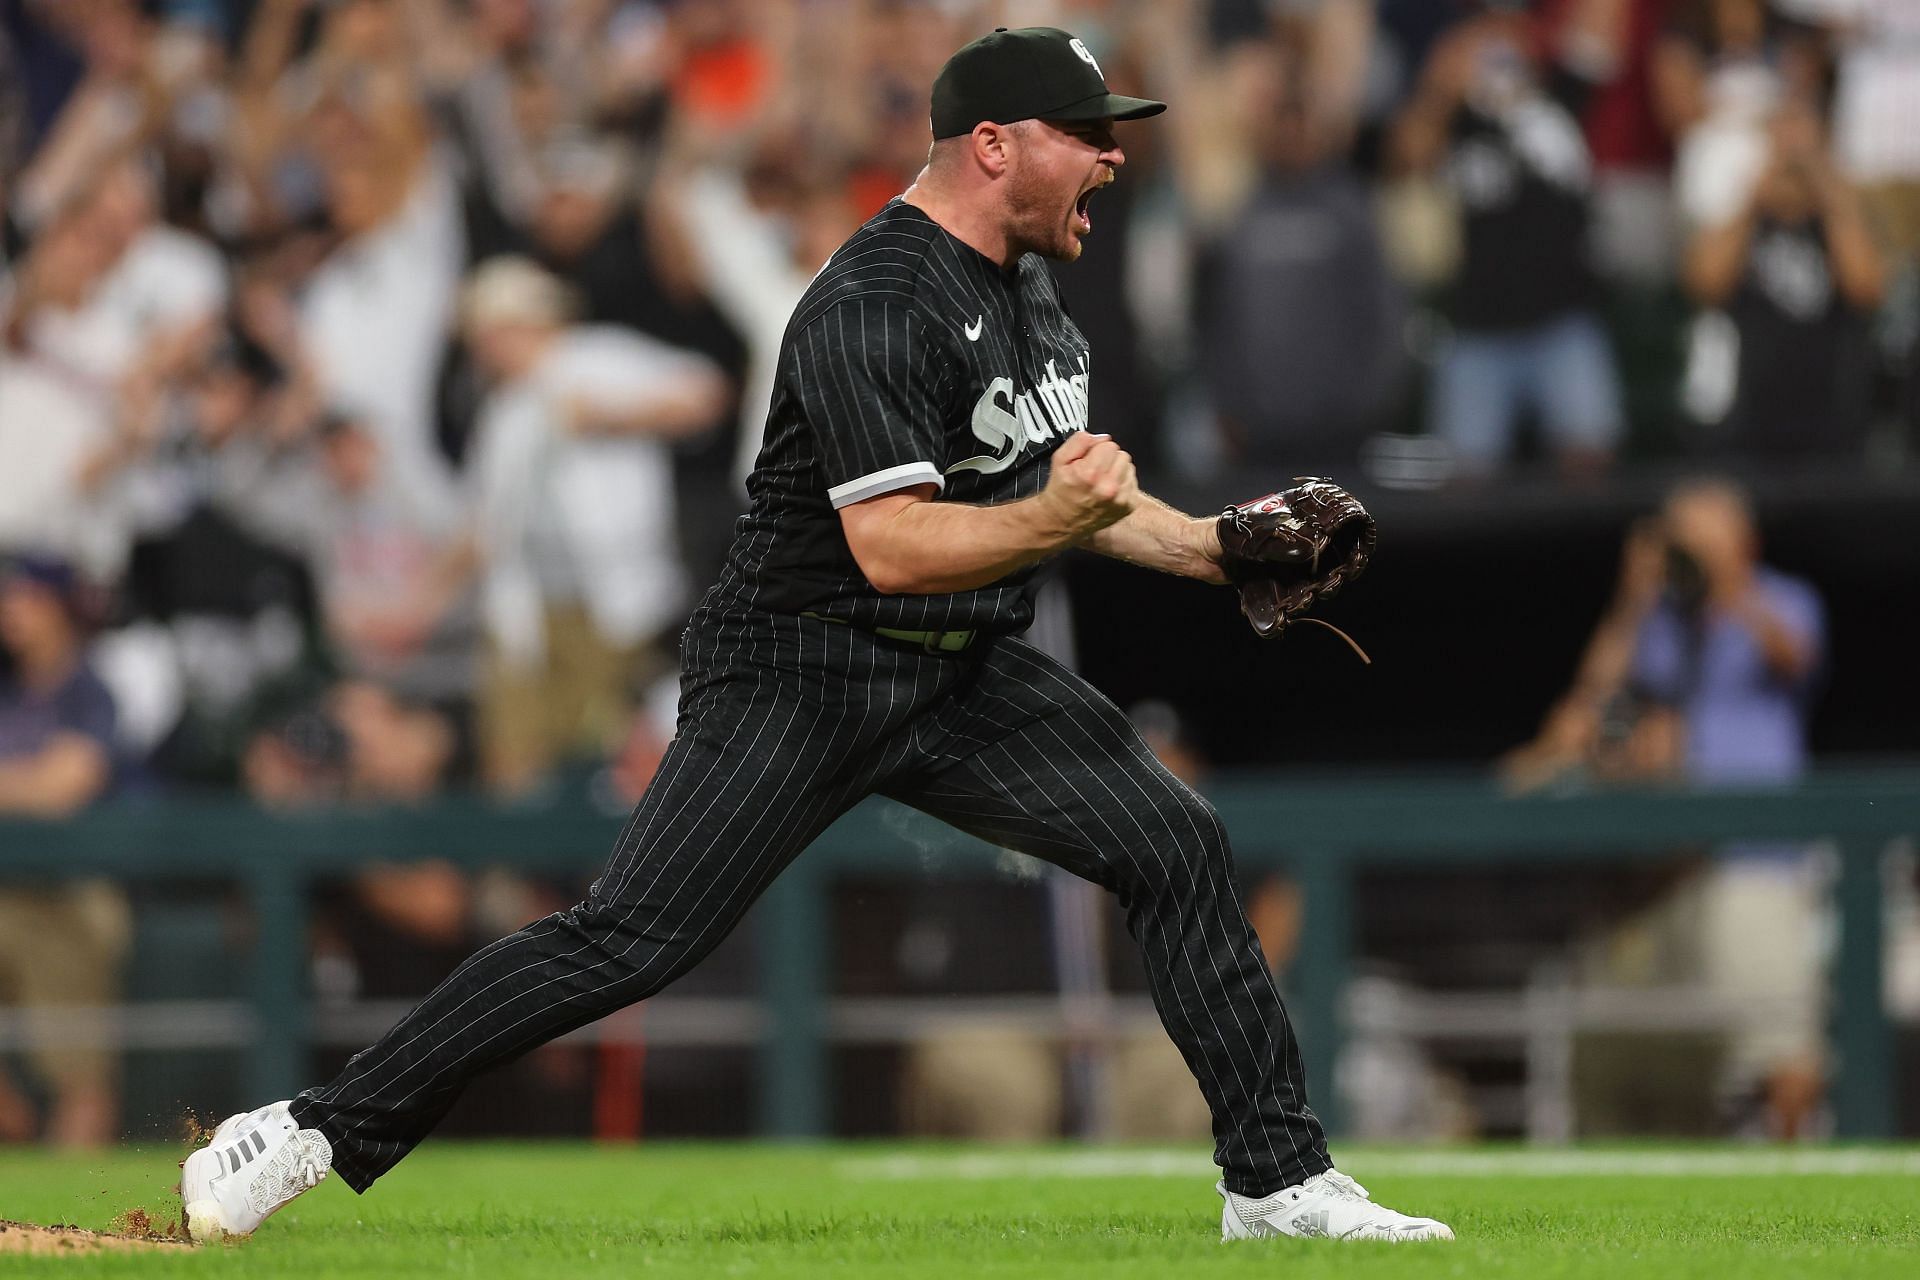 Liam Hendriks of the White Sox versus the Astros